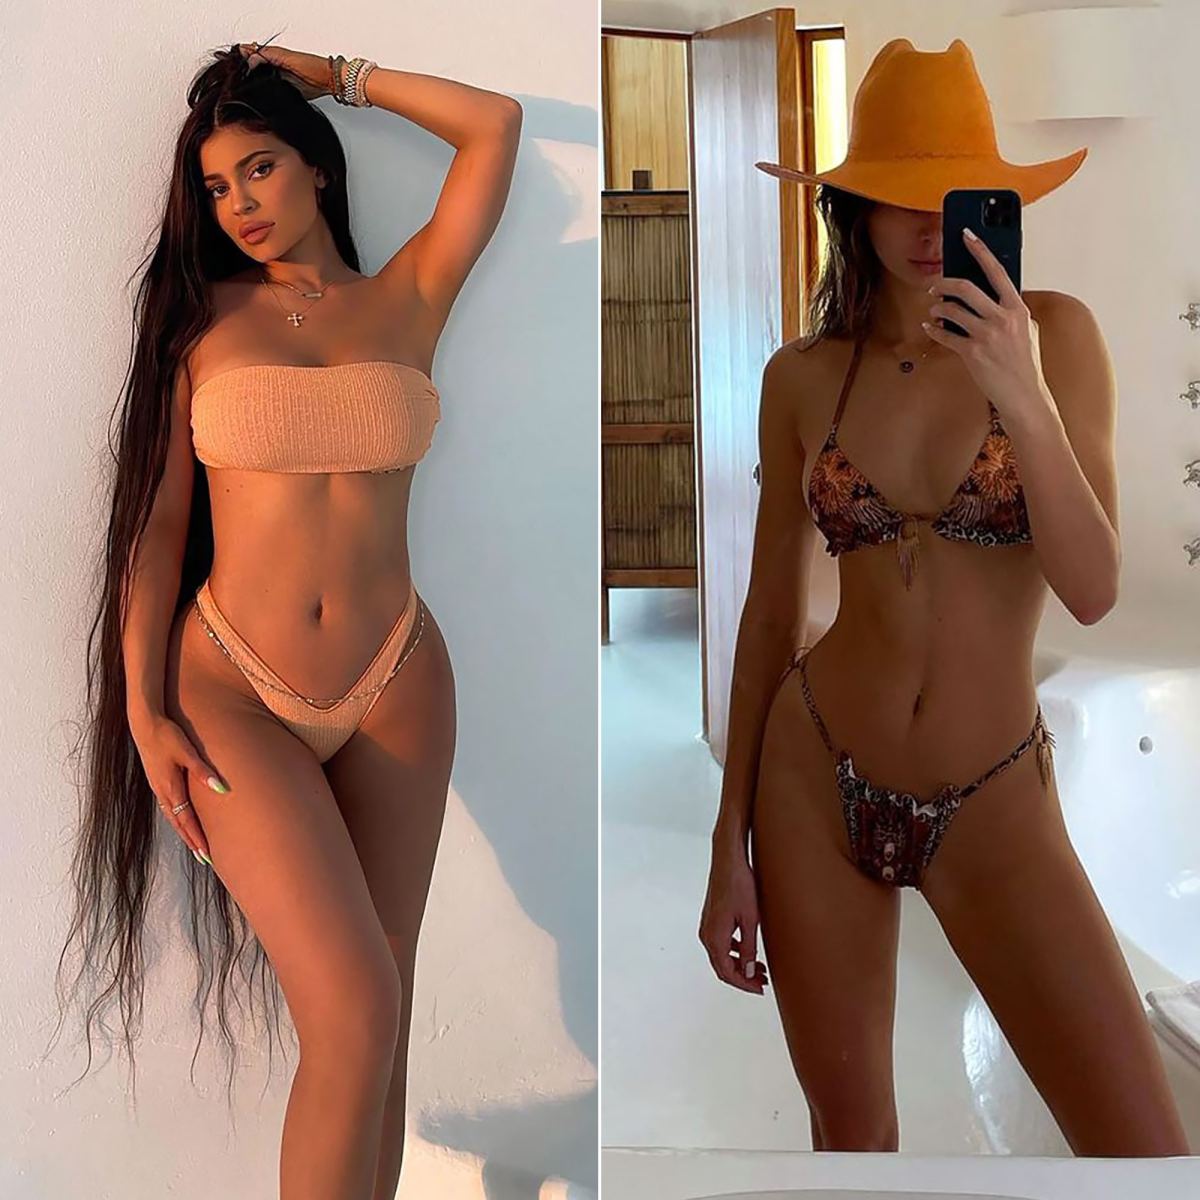 Shemale Nude Beach Sex - Kylie Jenner, Kendall Jenner Show Off Bikini Bodies in Mexico